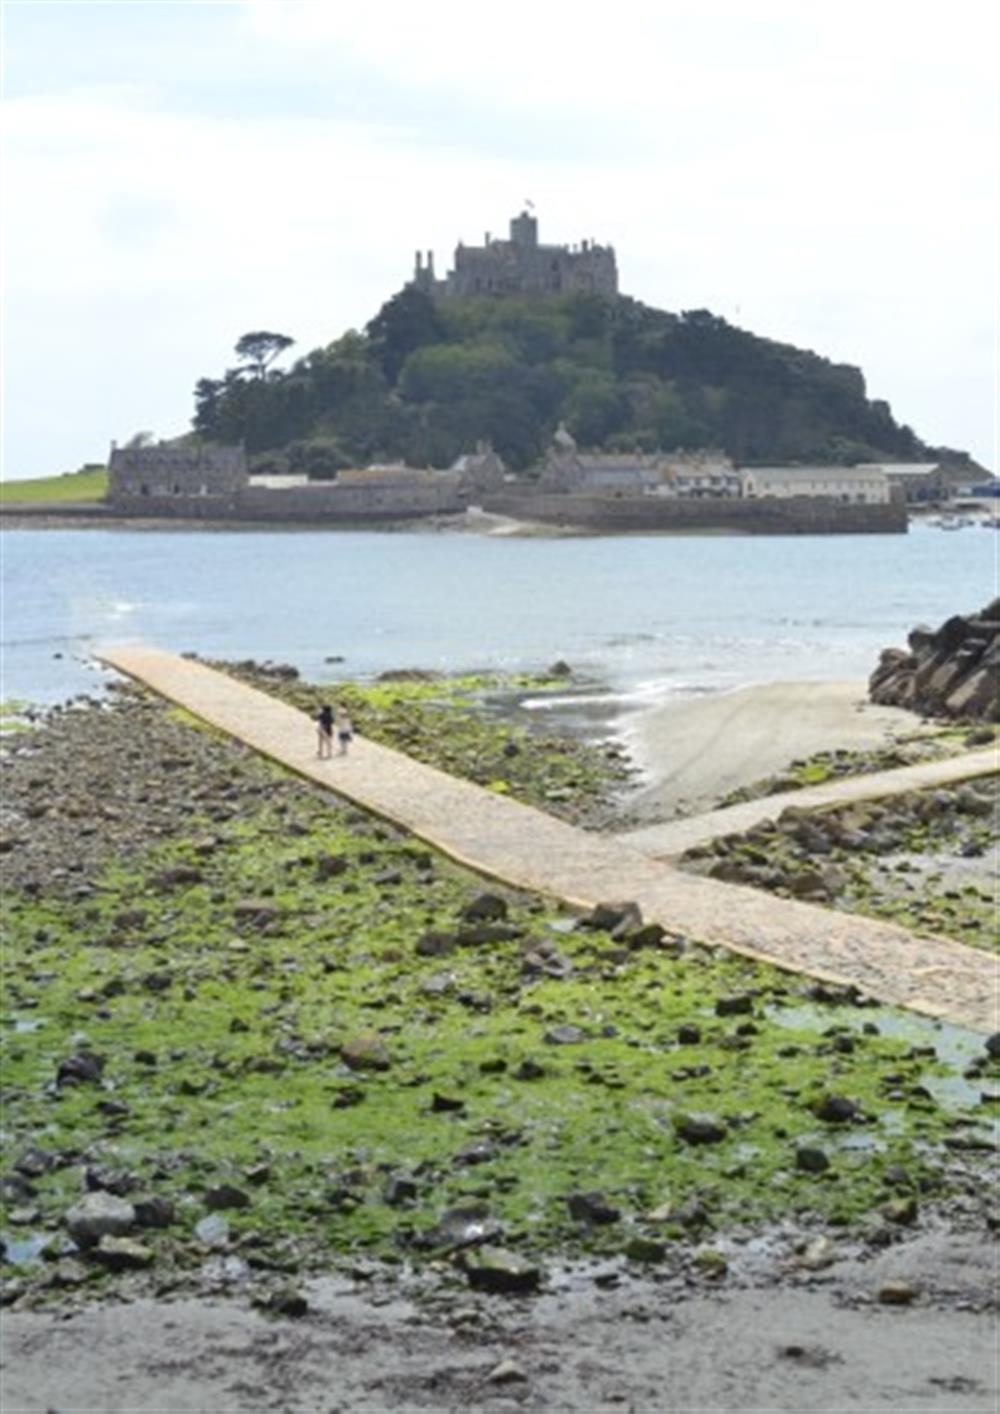 St Michael's Mount is about an hour away. Walk across the causeway (if the tide is out!) or catch the ferry across. at Little Budock in Helford Passage